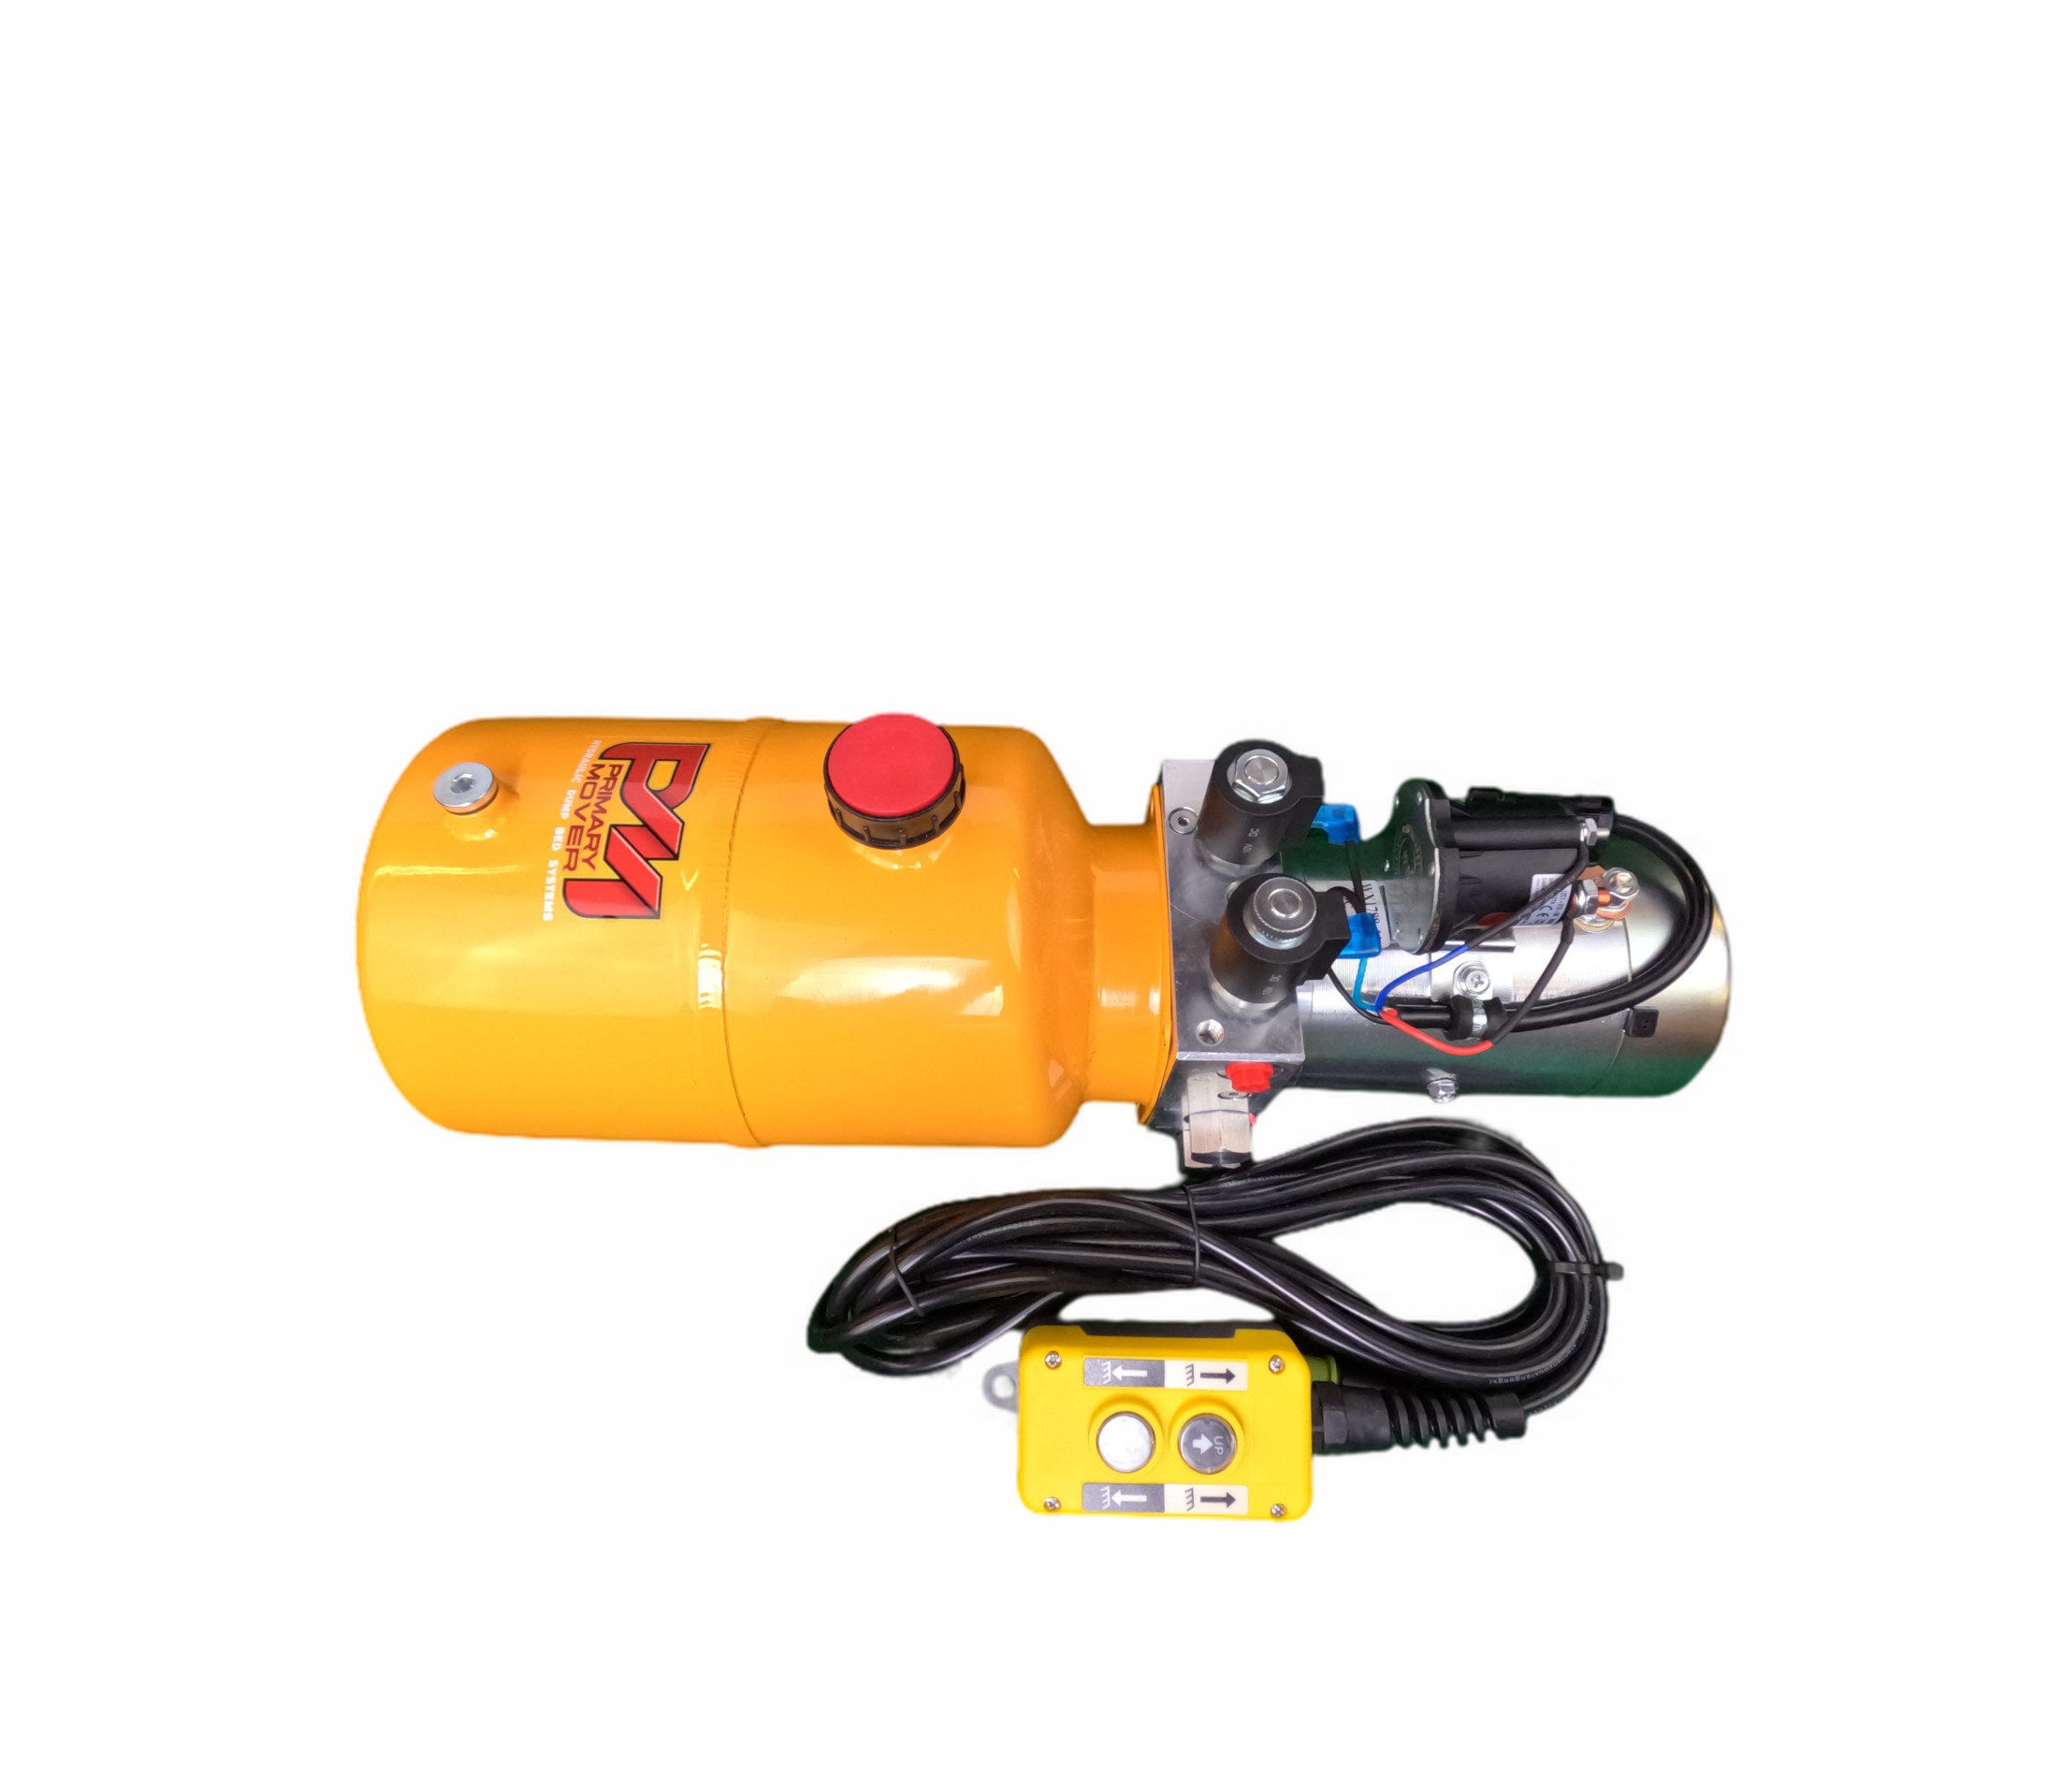 DLH 12V Double-Acting Hydraulic Pump - Steel Reservoir with dual-acting power-up/down, 3200 PSI max relief, 2.0 GPM, SAE #6 port, hand-held pendant, and 1-year warranty.